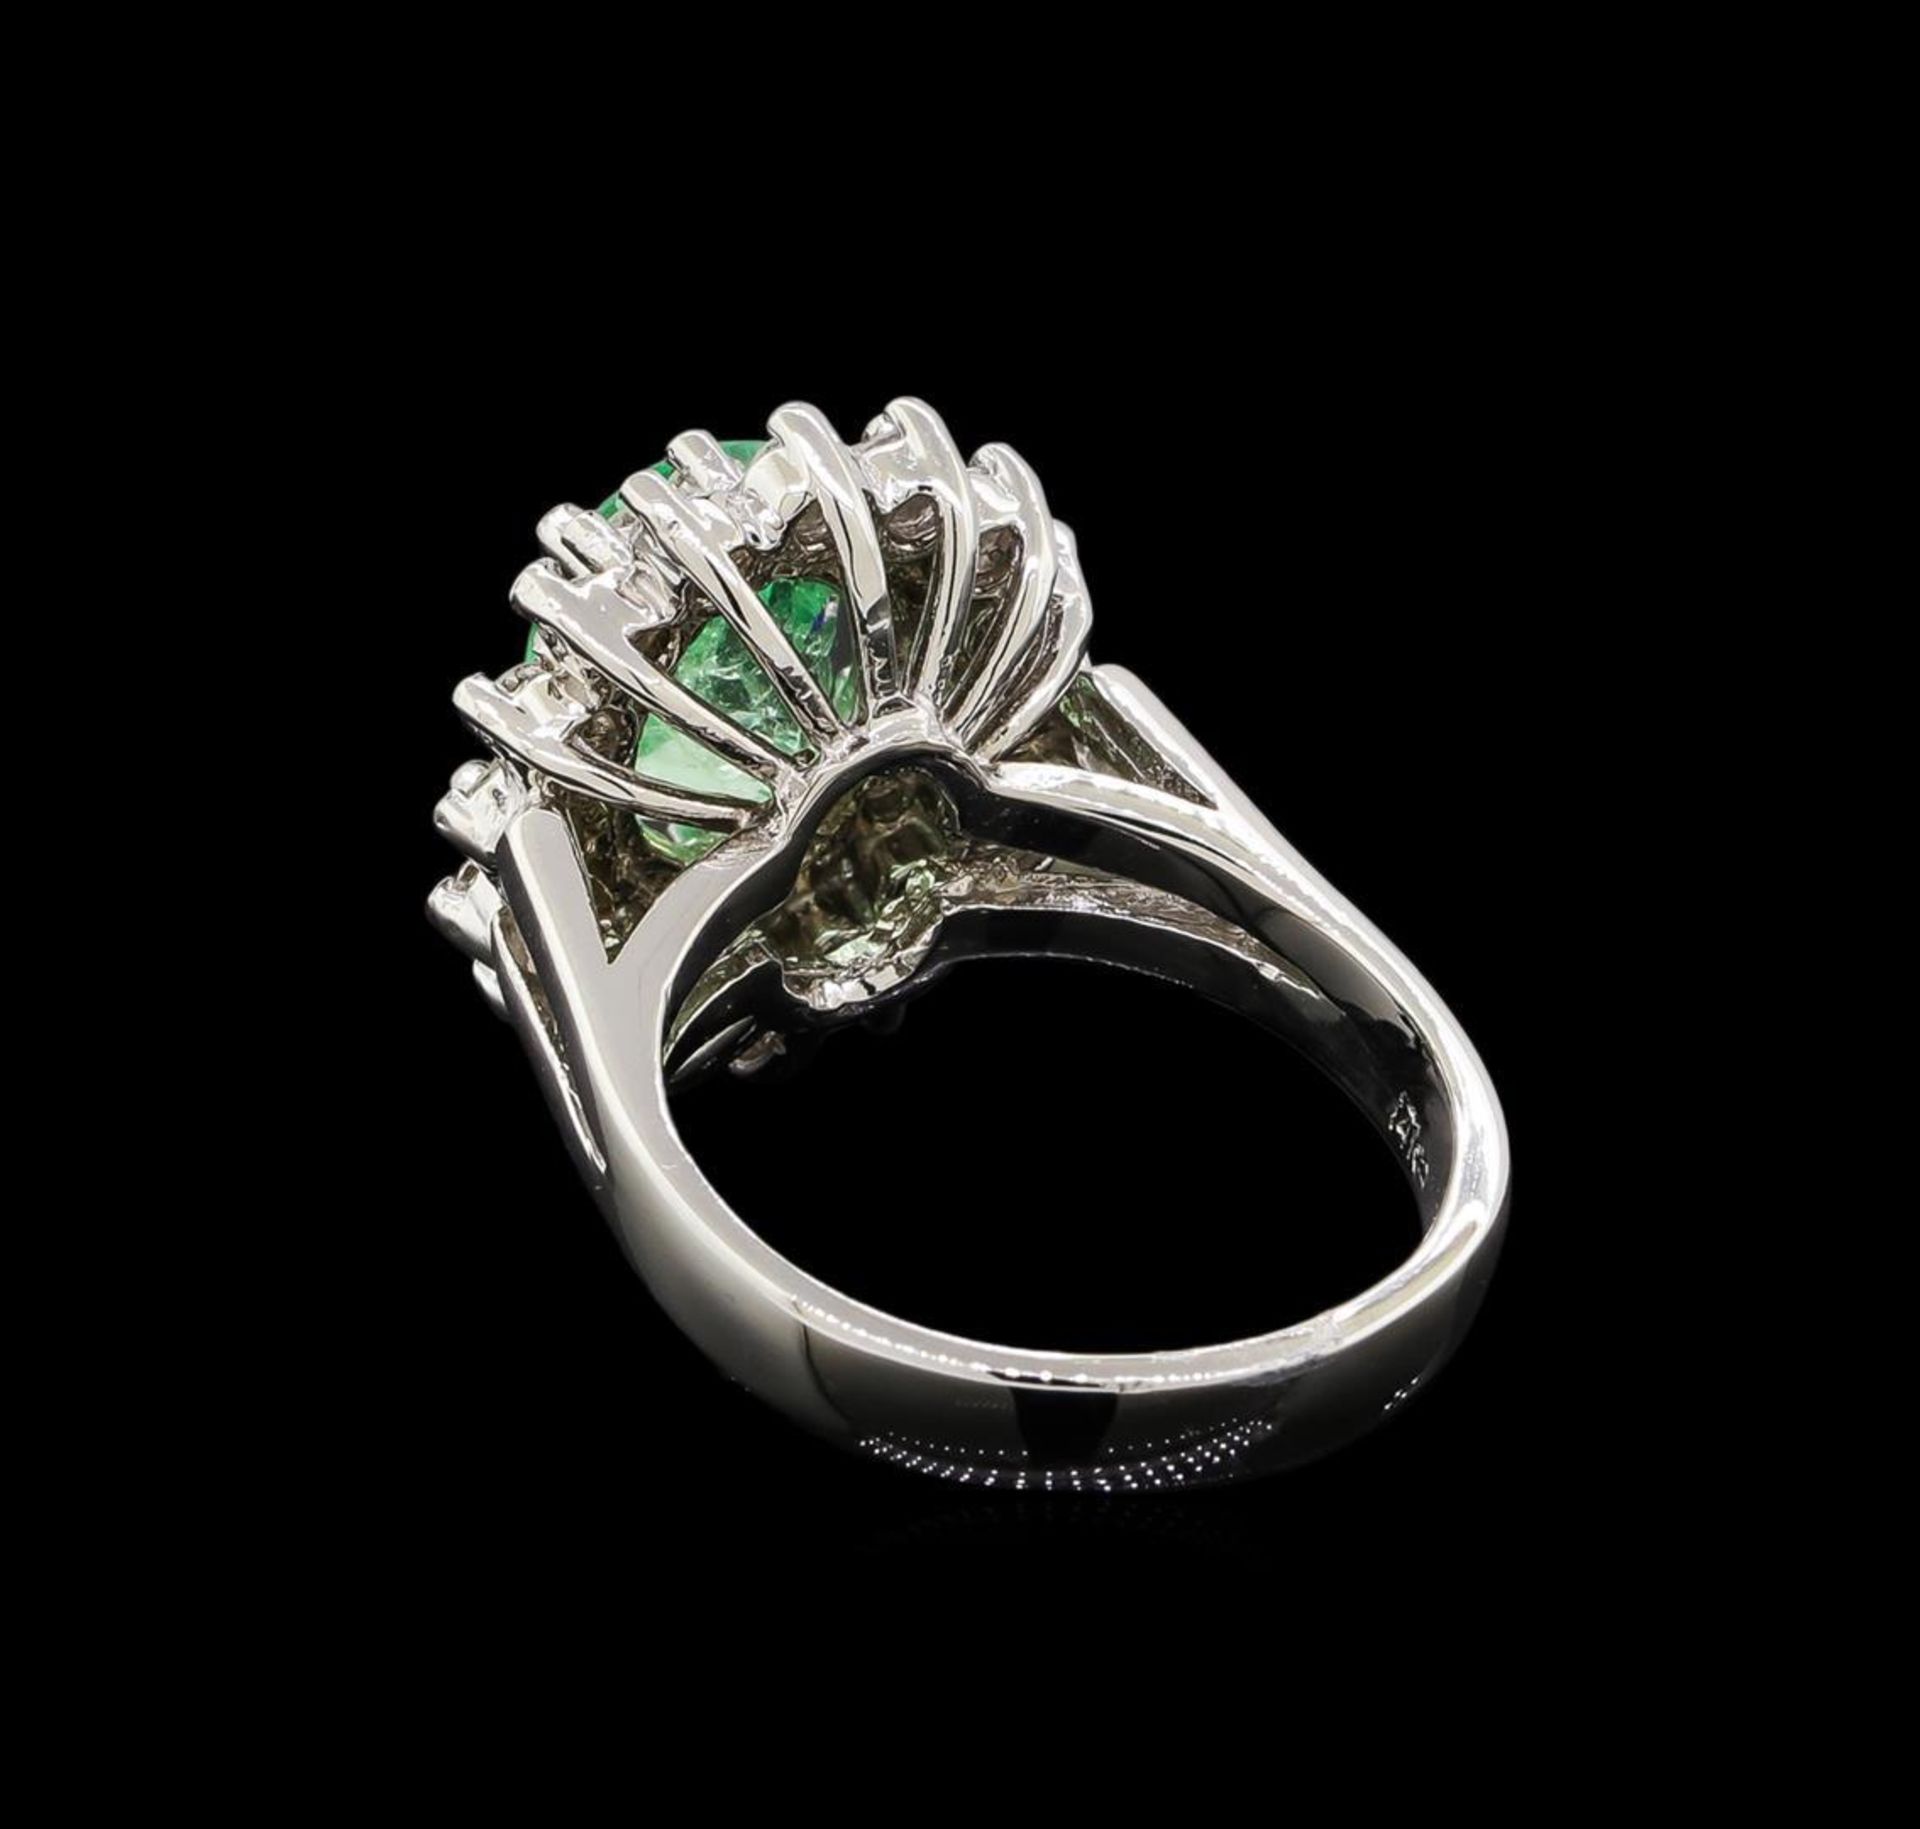 2.26 ctw Emerald and Diamond Ring - 14KT White Gold - Image 3 of 5